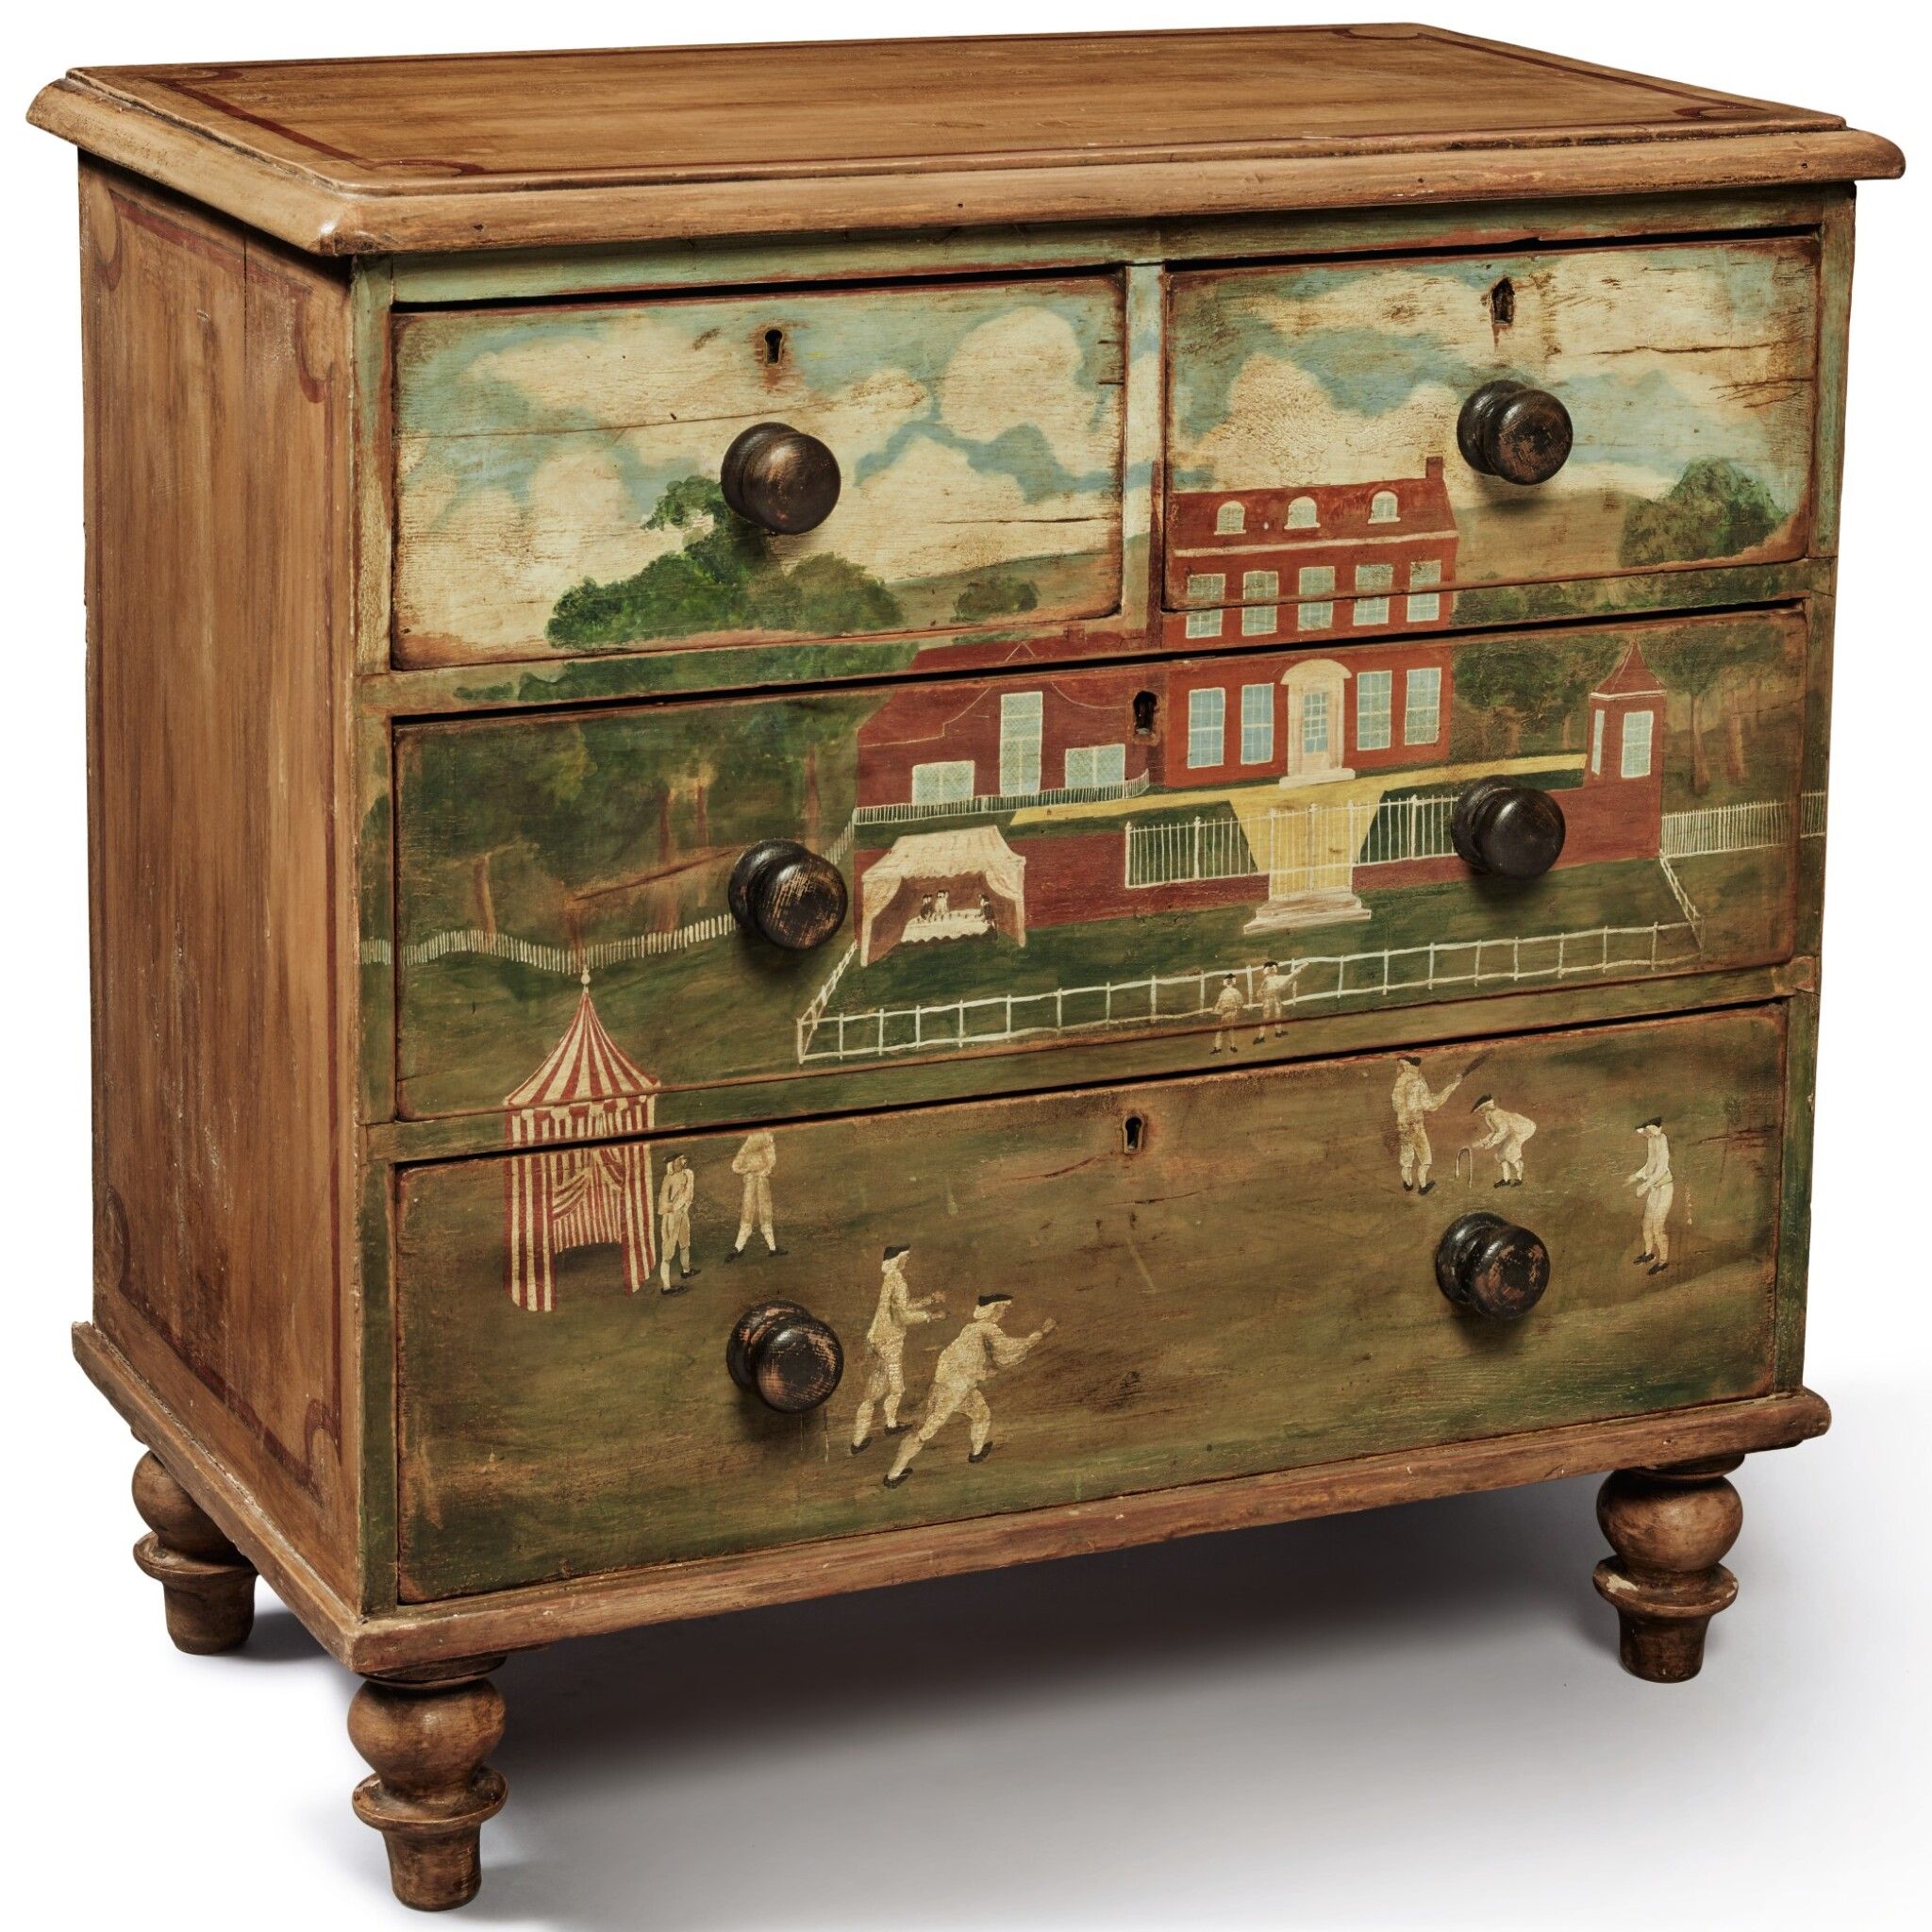 The Allure of 19th Century Pine Chest of Drawers: Beauty, Craftsmanship, and History